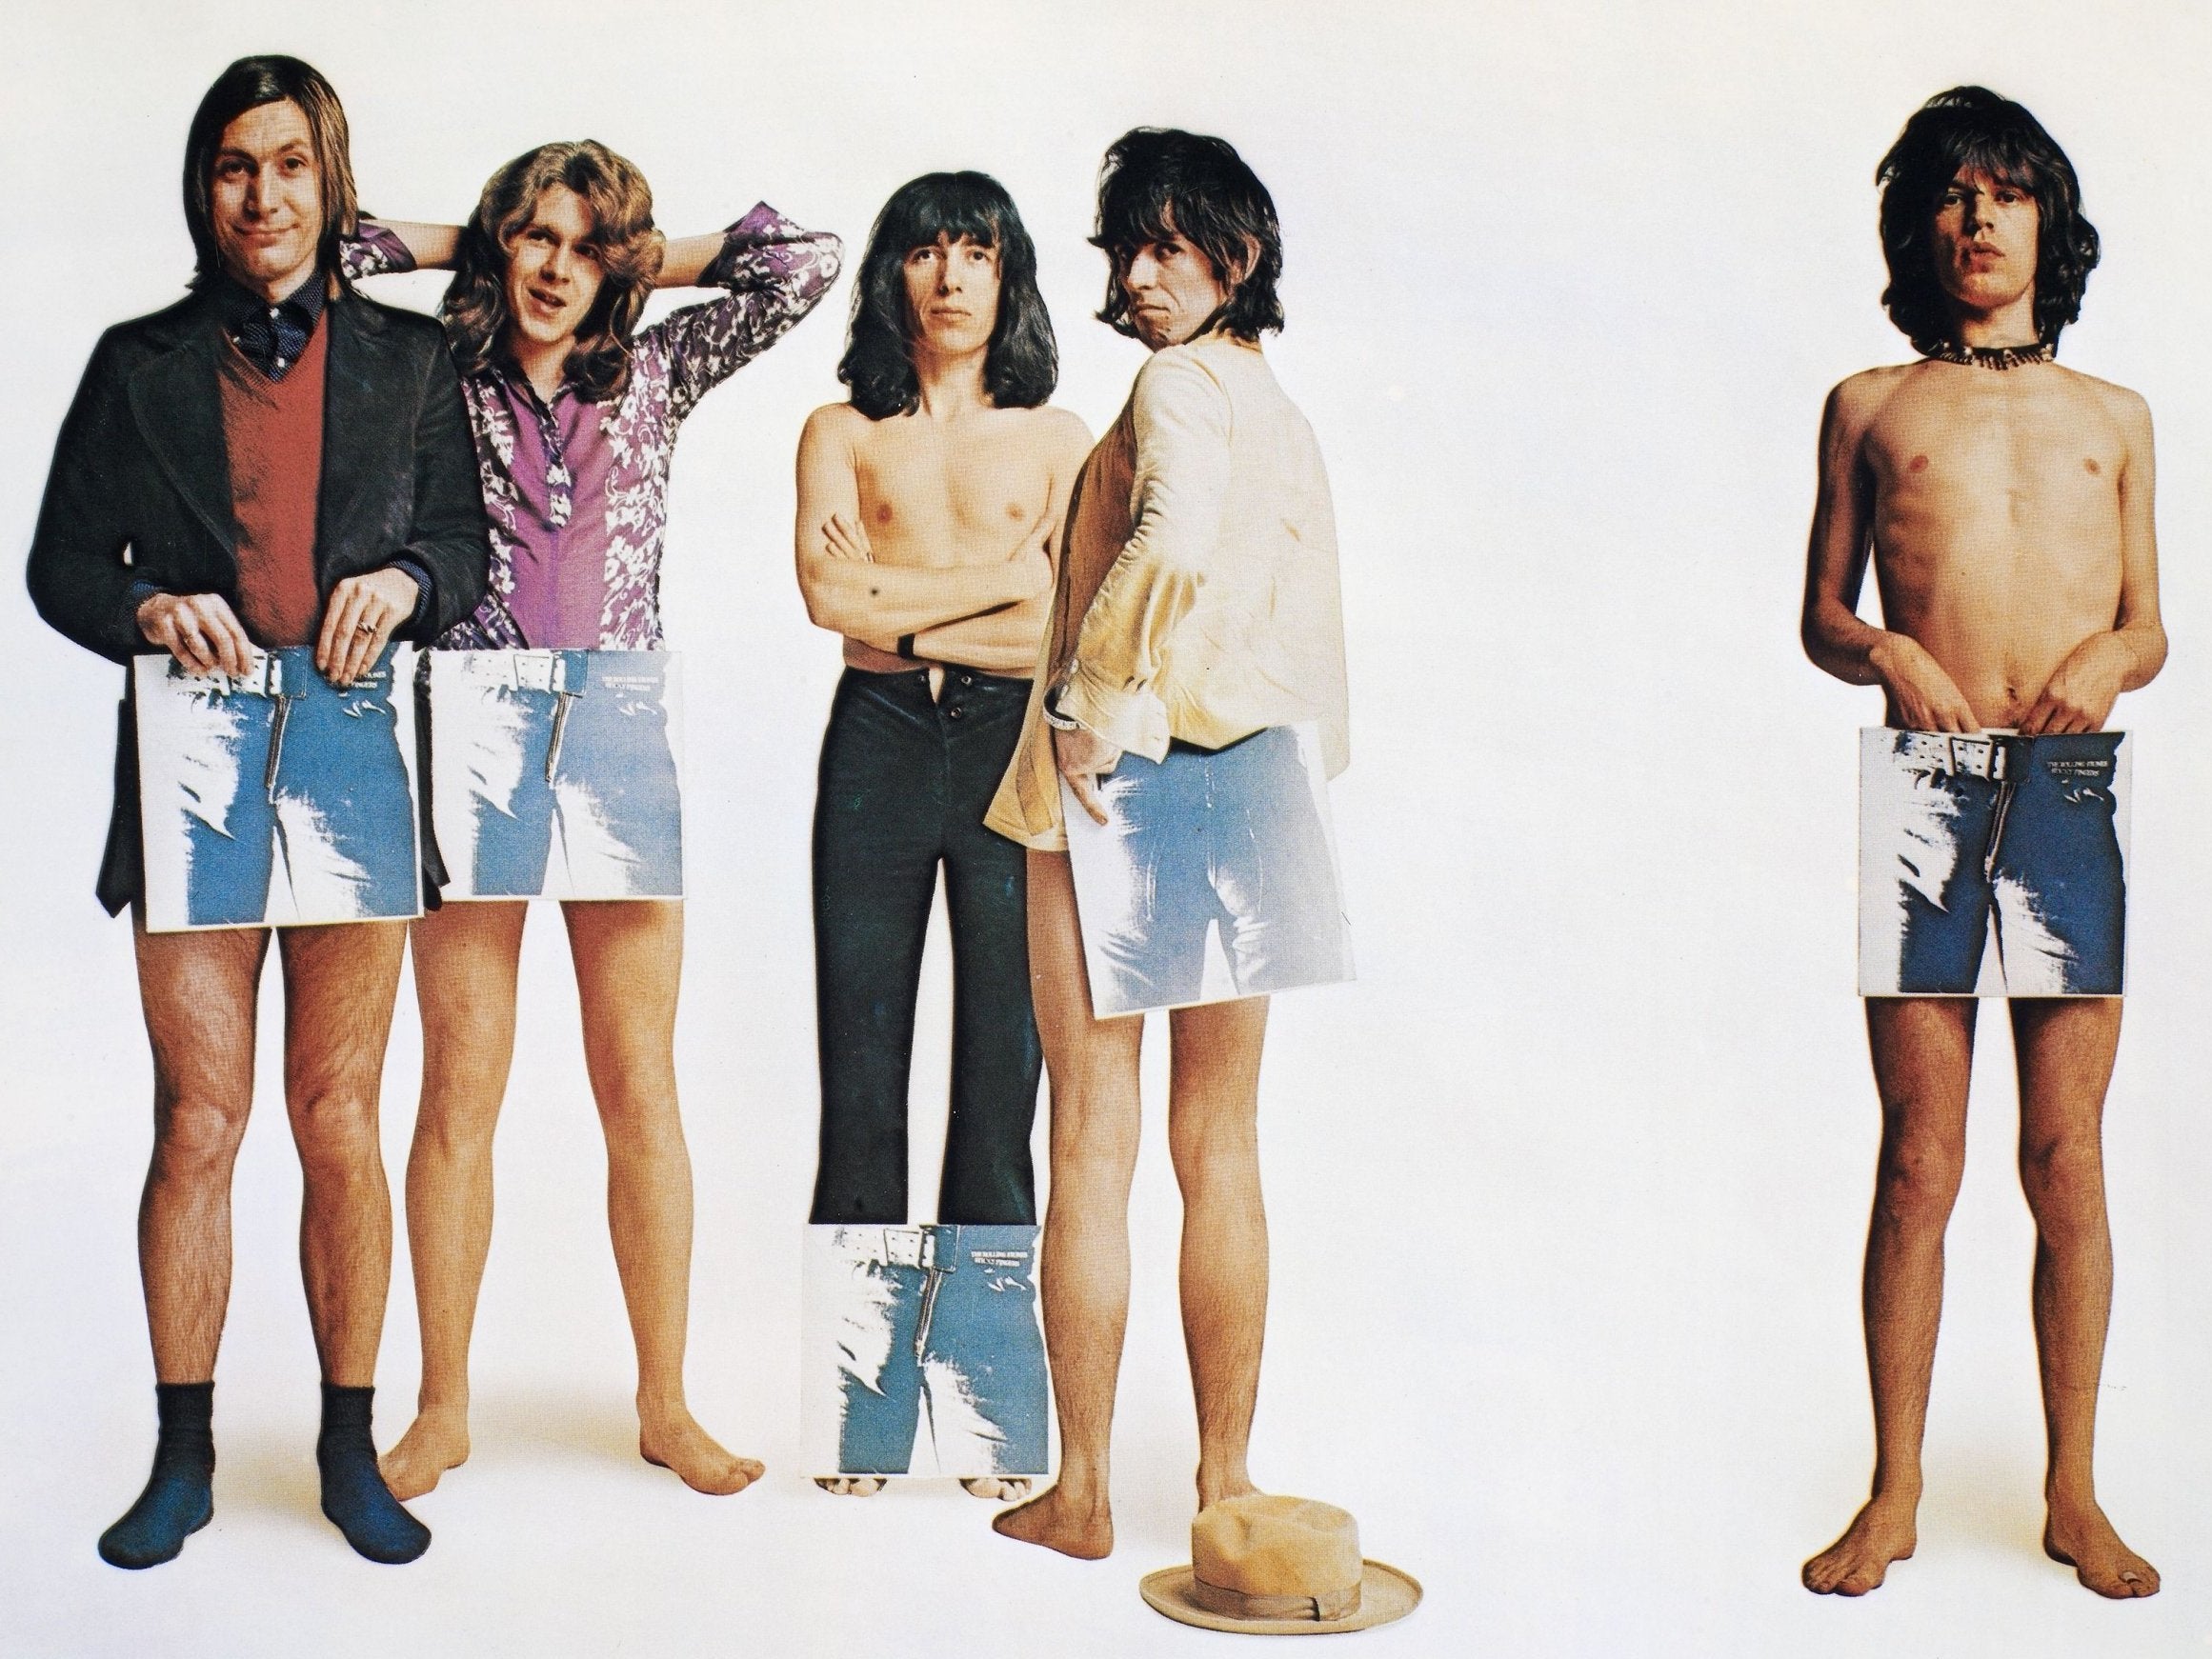 &#13;
The Rolling Stones released their album ‘Sticky Fingers’ in 1971 &#13;